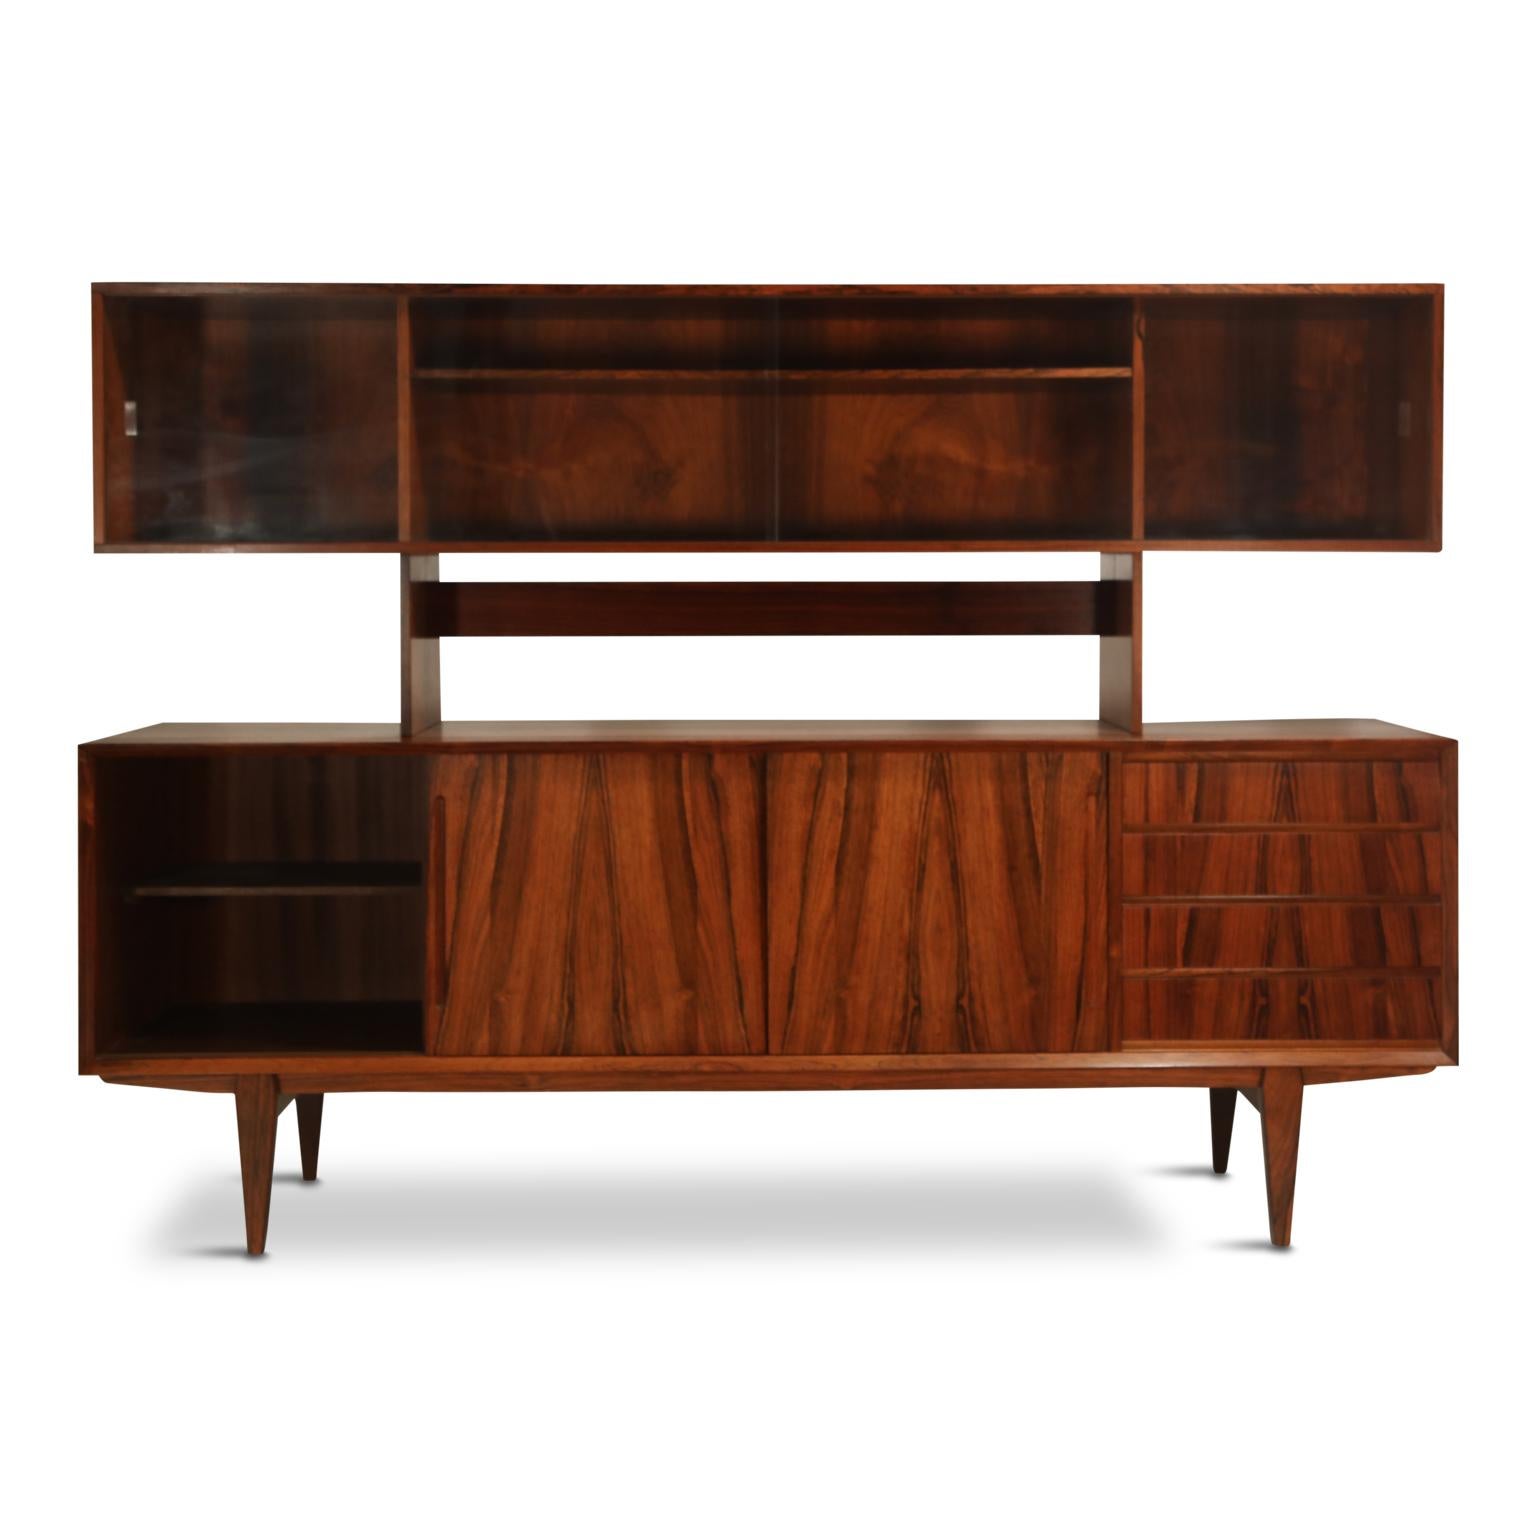 Incredible rosewood grain on this Danish modern sideboard and hutch by Peter Lovig Nielson, and retailed by Maurice Villency, signed on the back with makers mark and retailer label on an inside drawer. Normally this design is found in teak,